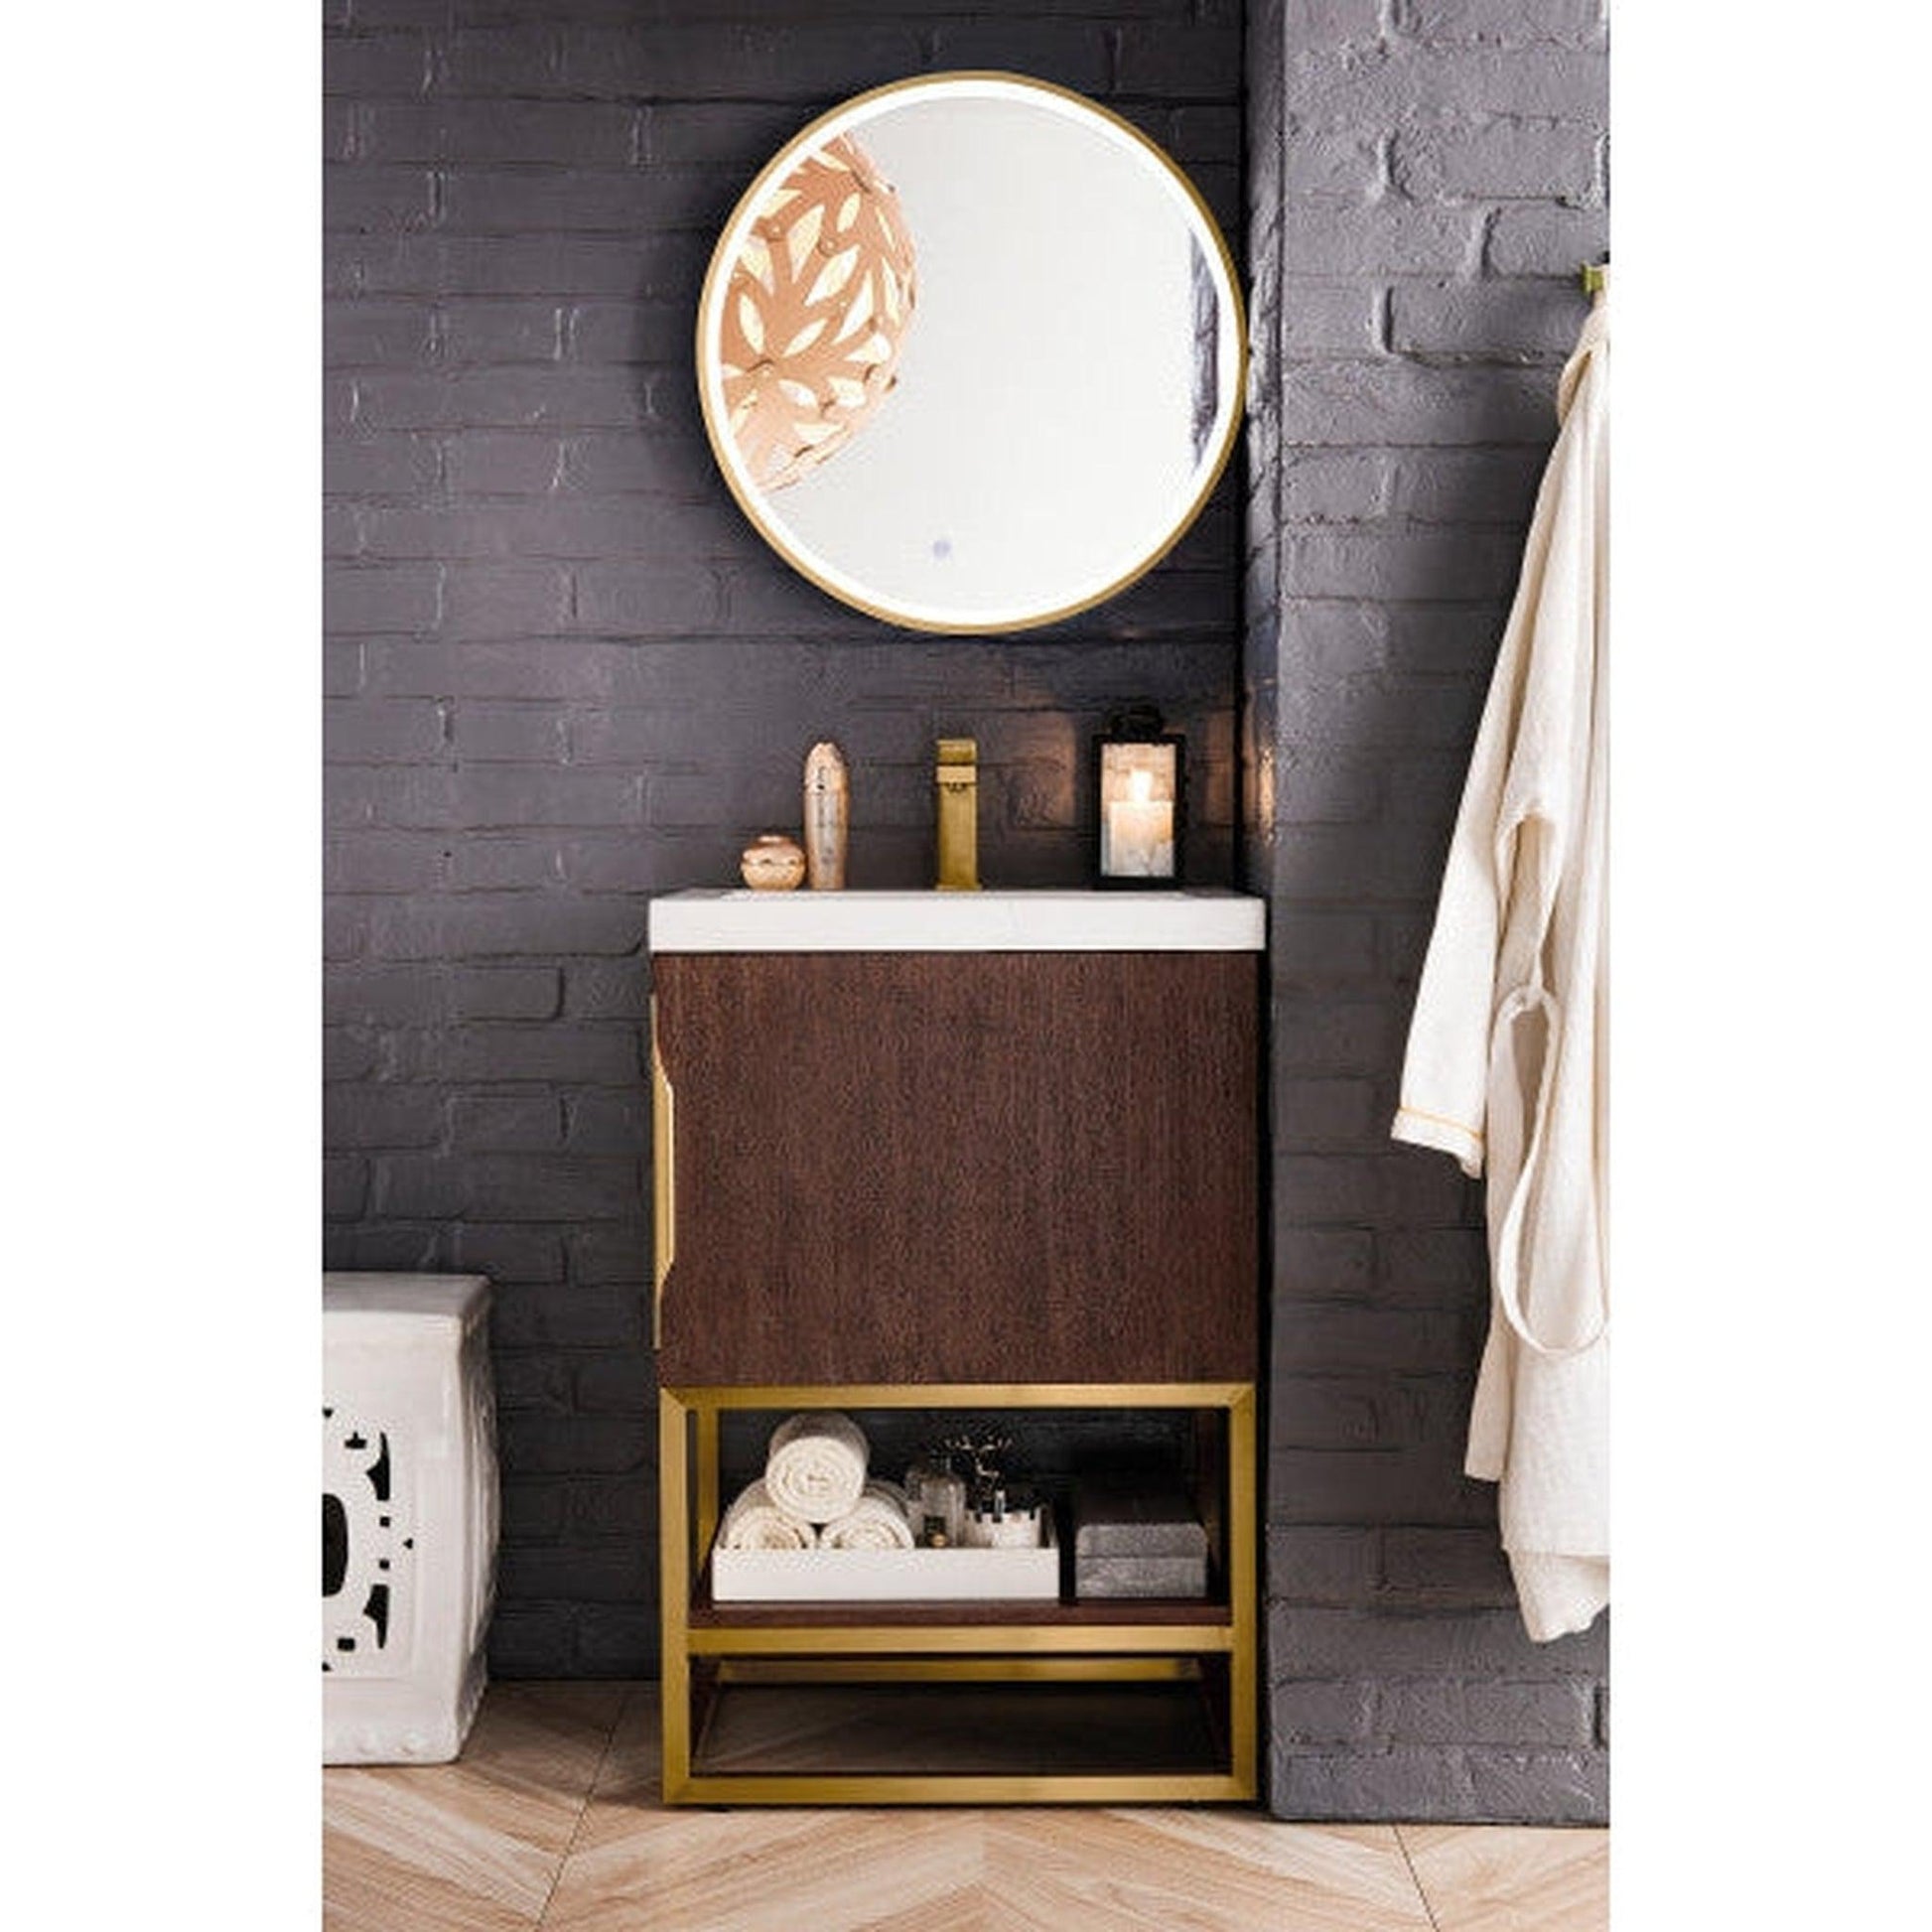 James Martin Columbia 24" Single Coffee Oak Bathroom Vanity With Radiant Gold Hardware and 2" Glossy White Composite Countertop